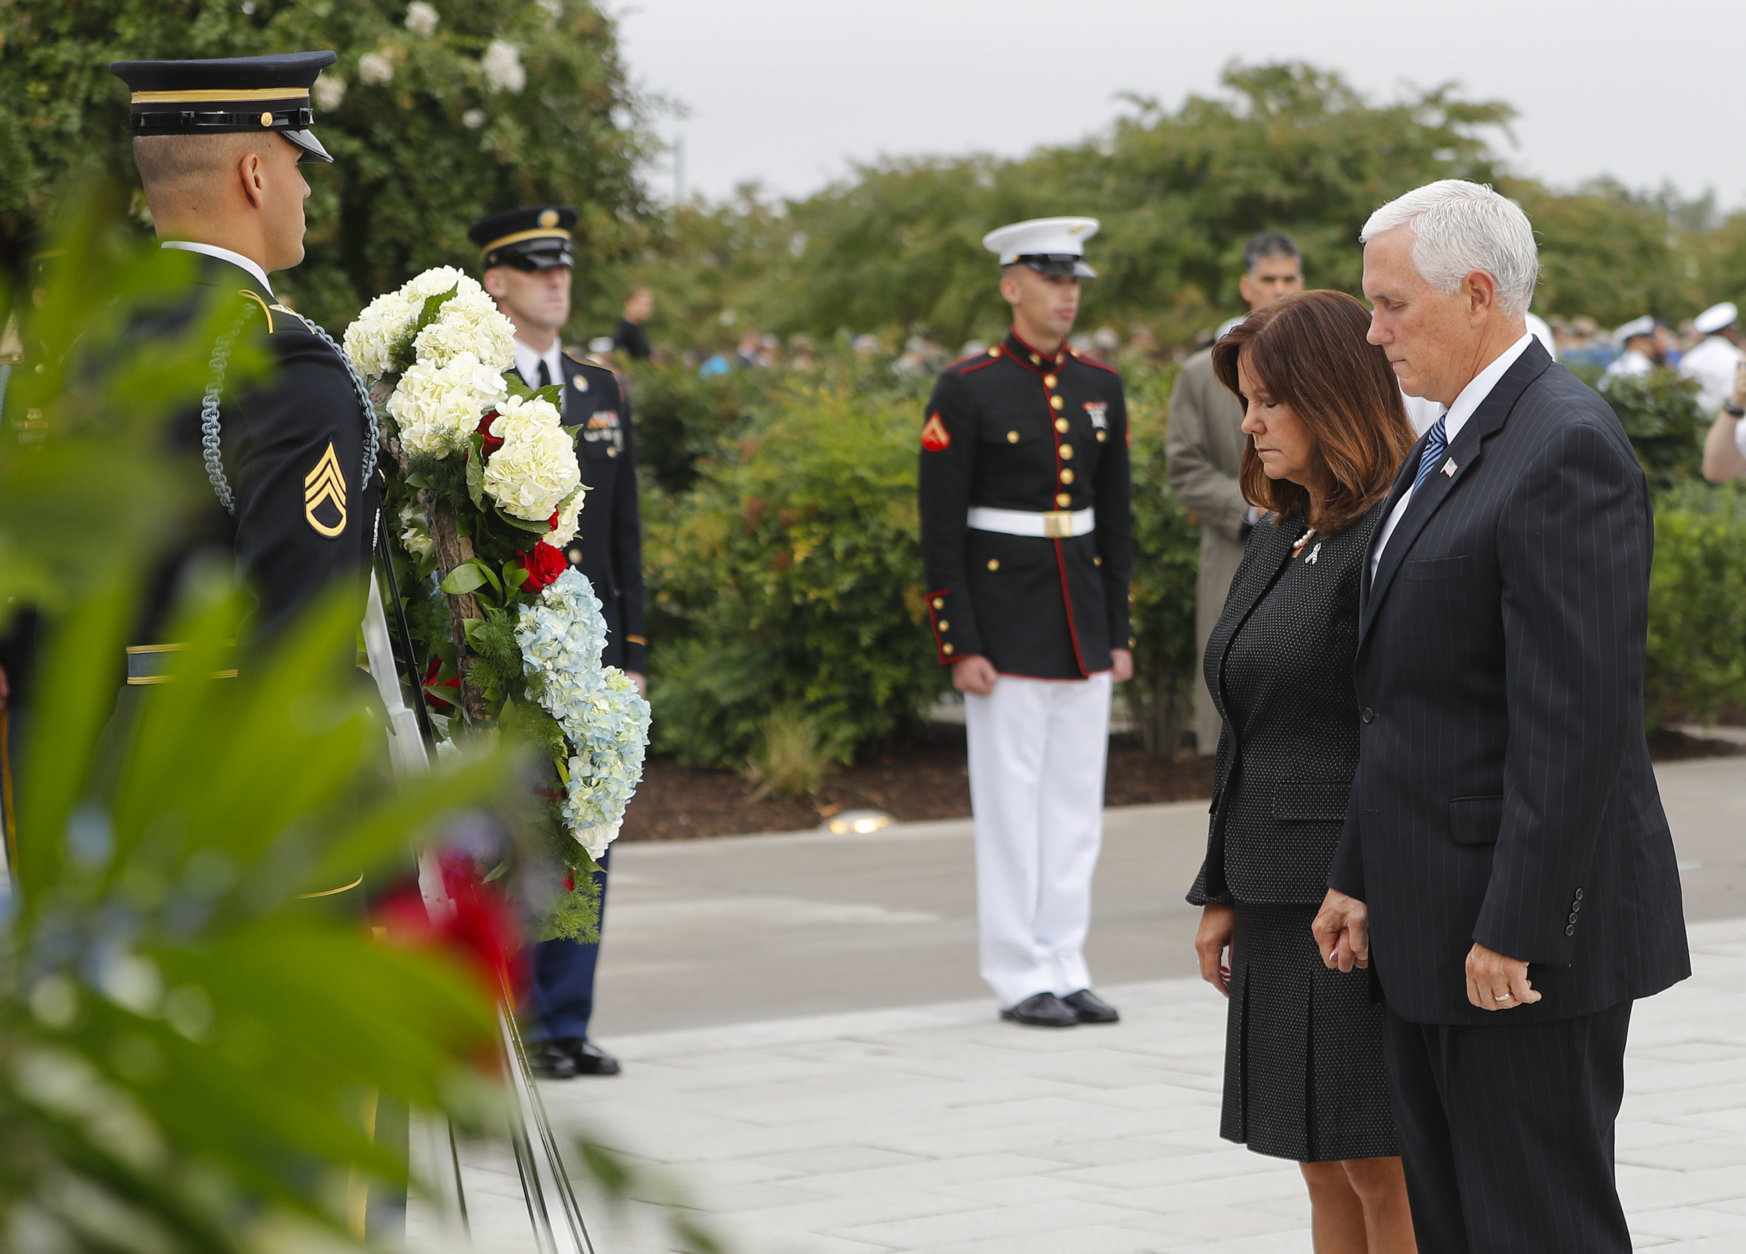 Vice President Mike Pence and his wife Karen Pence, lower their heads after laying a wreath during the September 11th Pentagon Memorial Observance at the Pentagon on the 17th anniversary of the September 11th attacks, Tuesday, Sept. 11, 2018. (AP Photo/Pablo Martinez Monsivais)